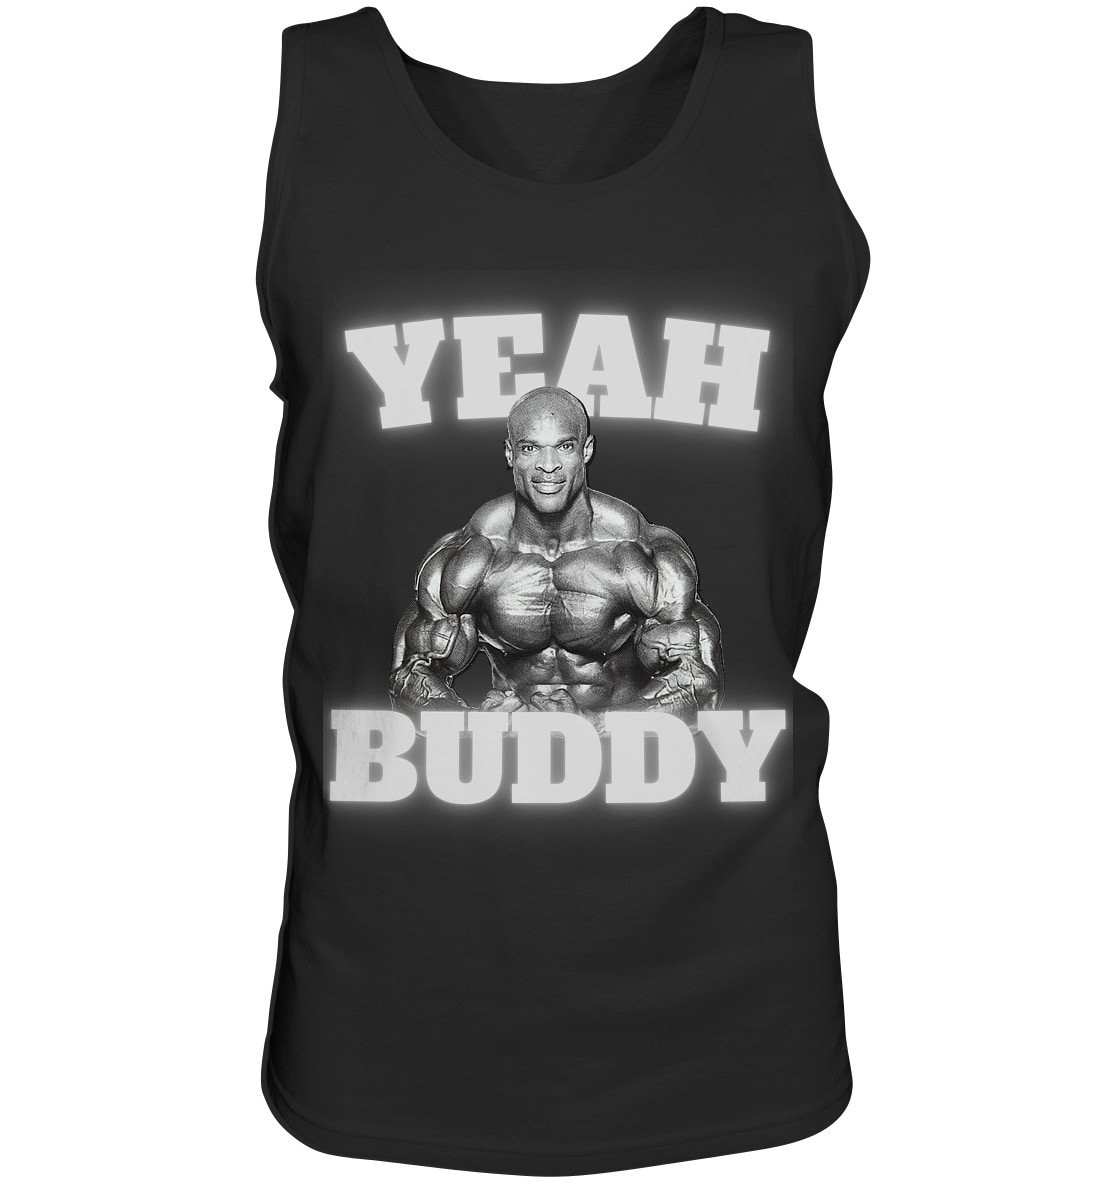 New Ronnie Coleman The King Yeah Buddy Tank Top gym training